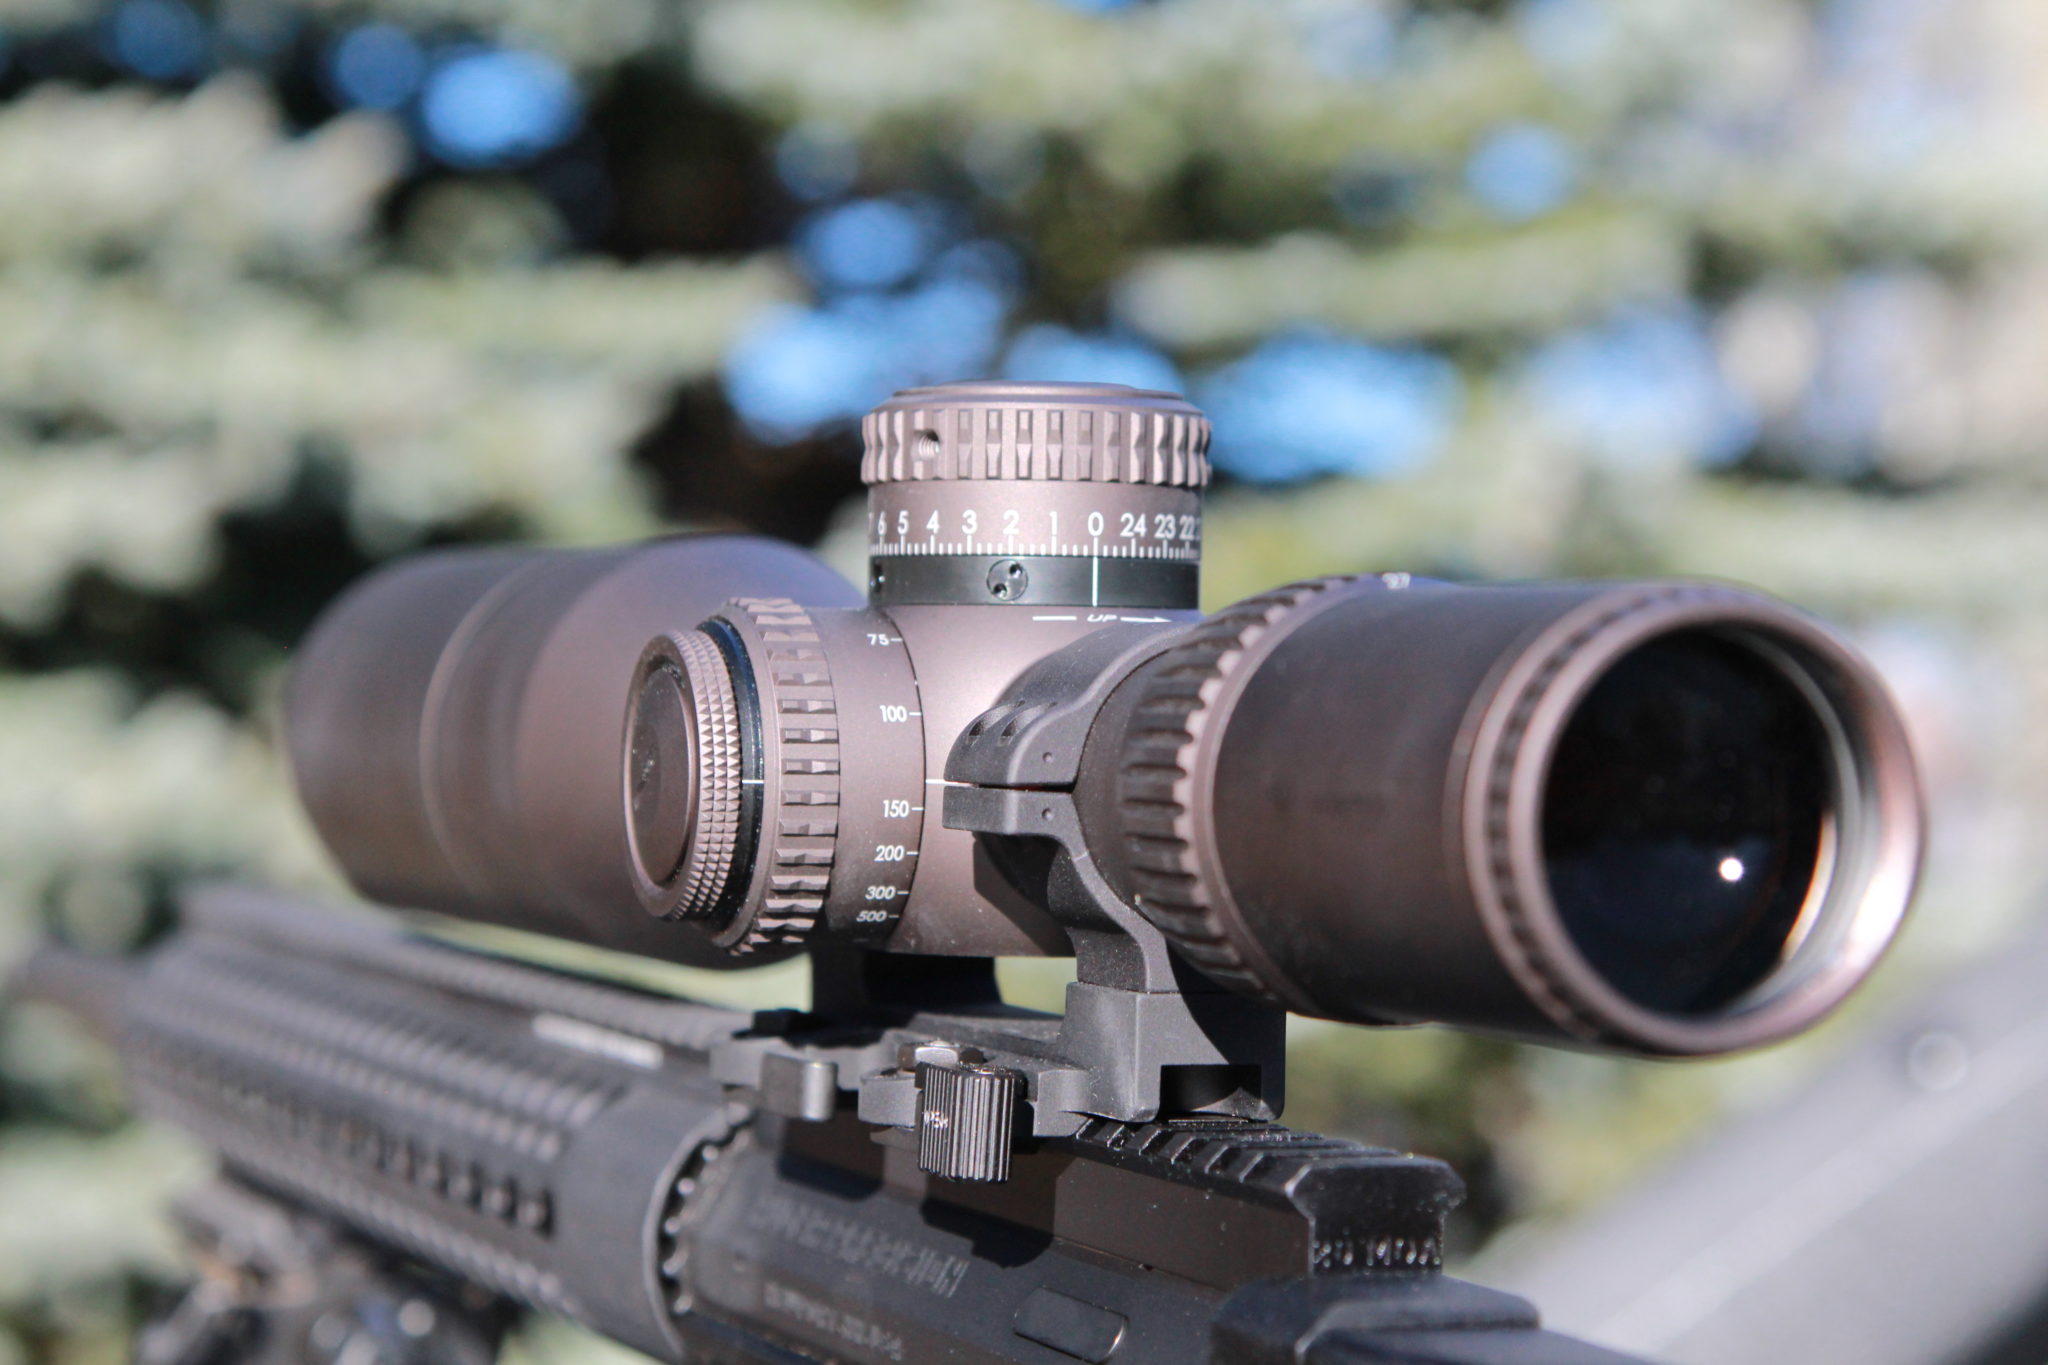 An in depth review of the best long range scopes in 2018